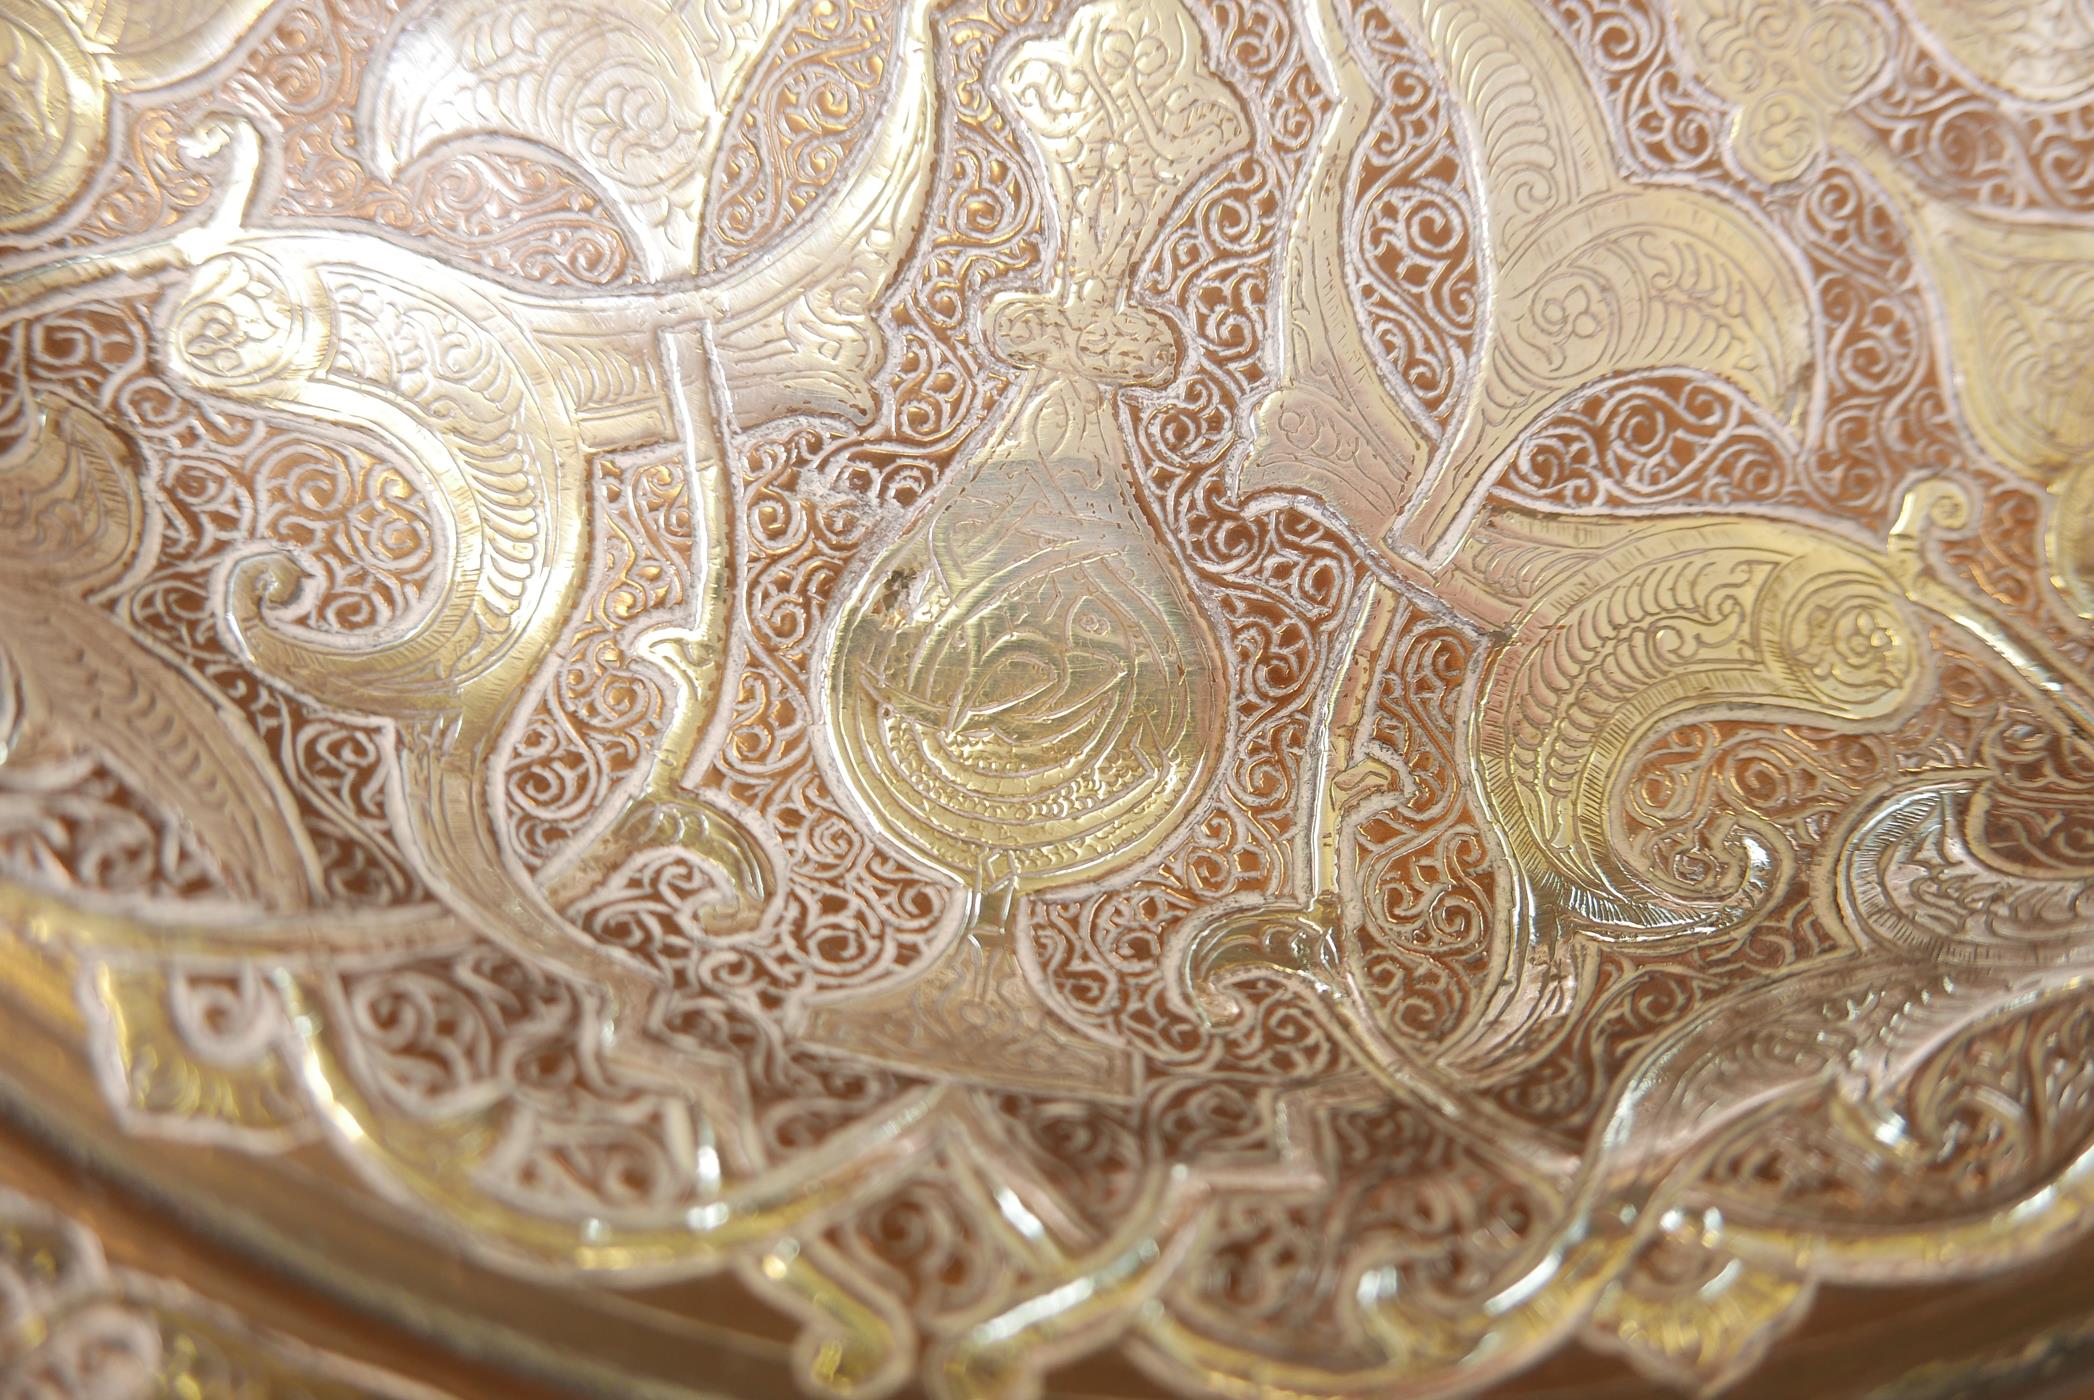 A good Islamic copper bowl, with raised & inlaid silver, engraved with calligraphy, 11" diameter - Image 6 of 6